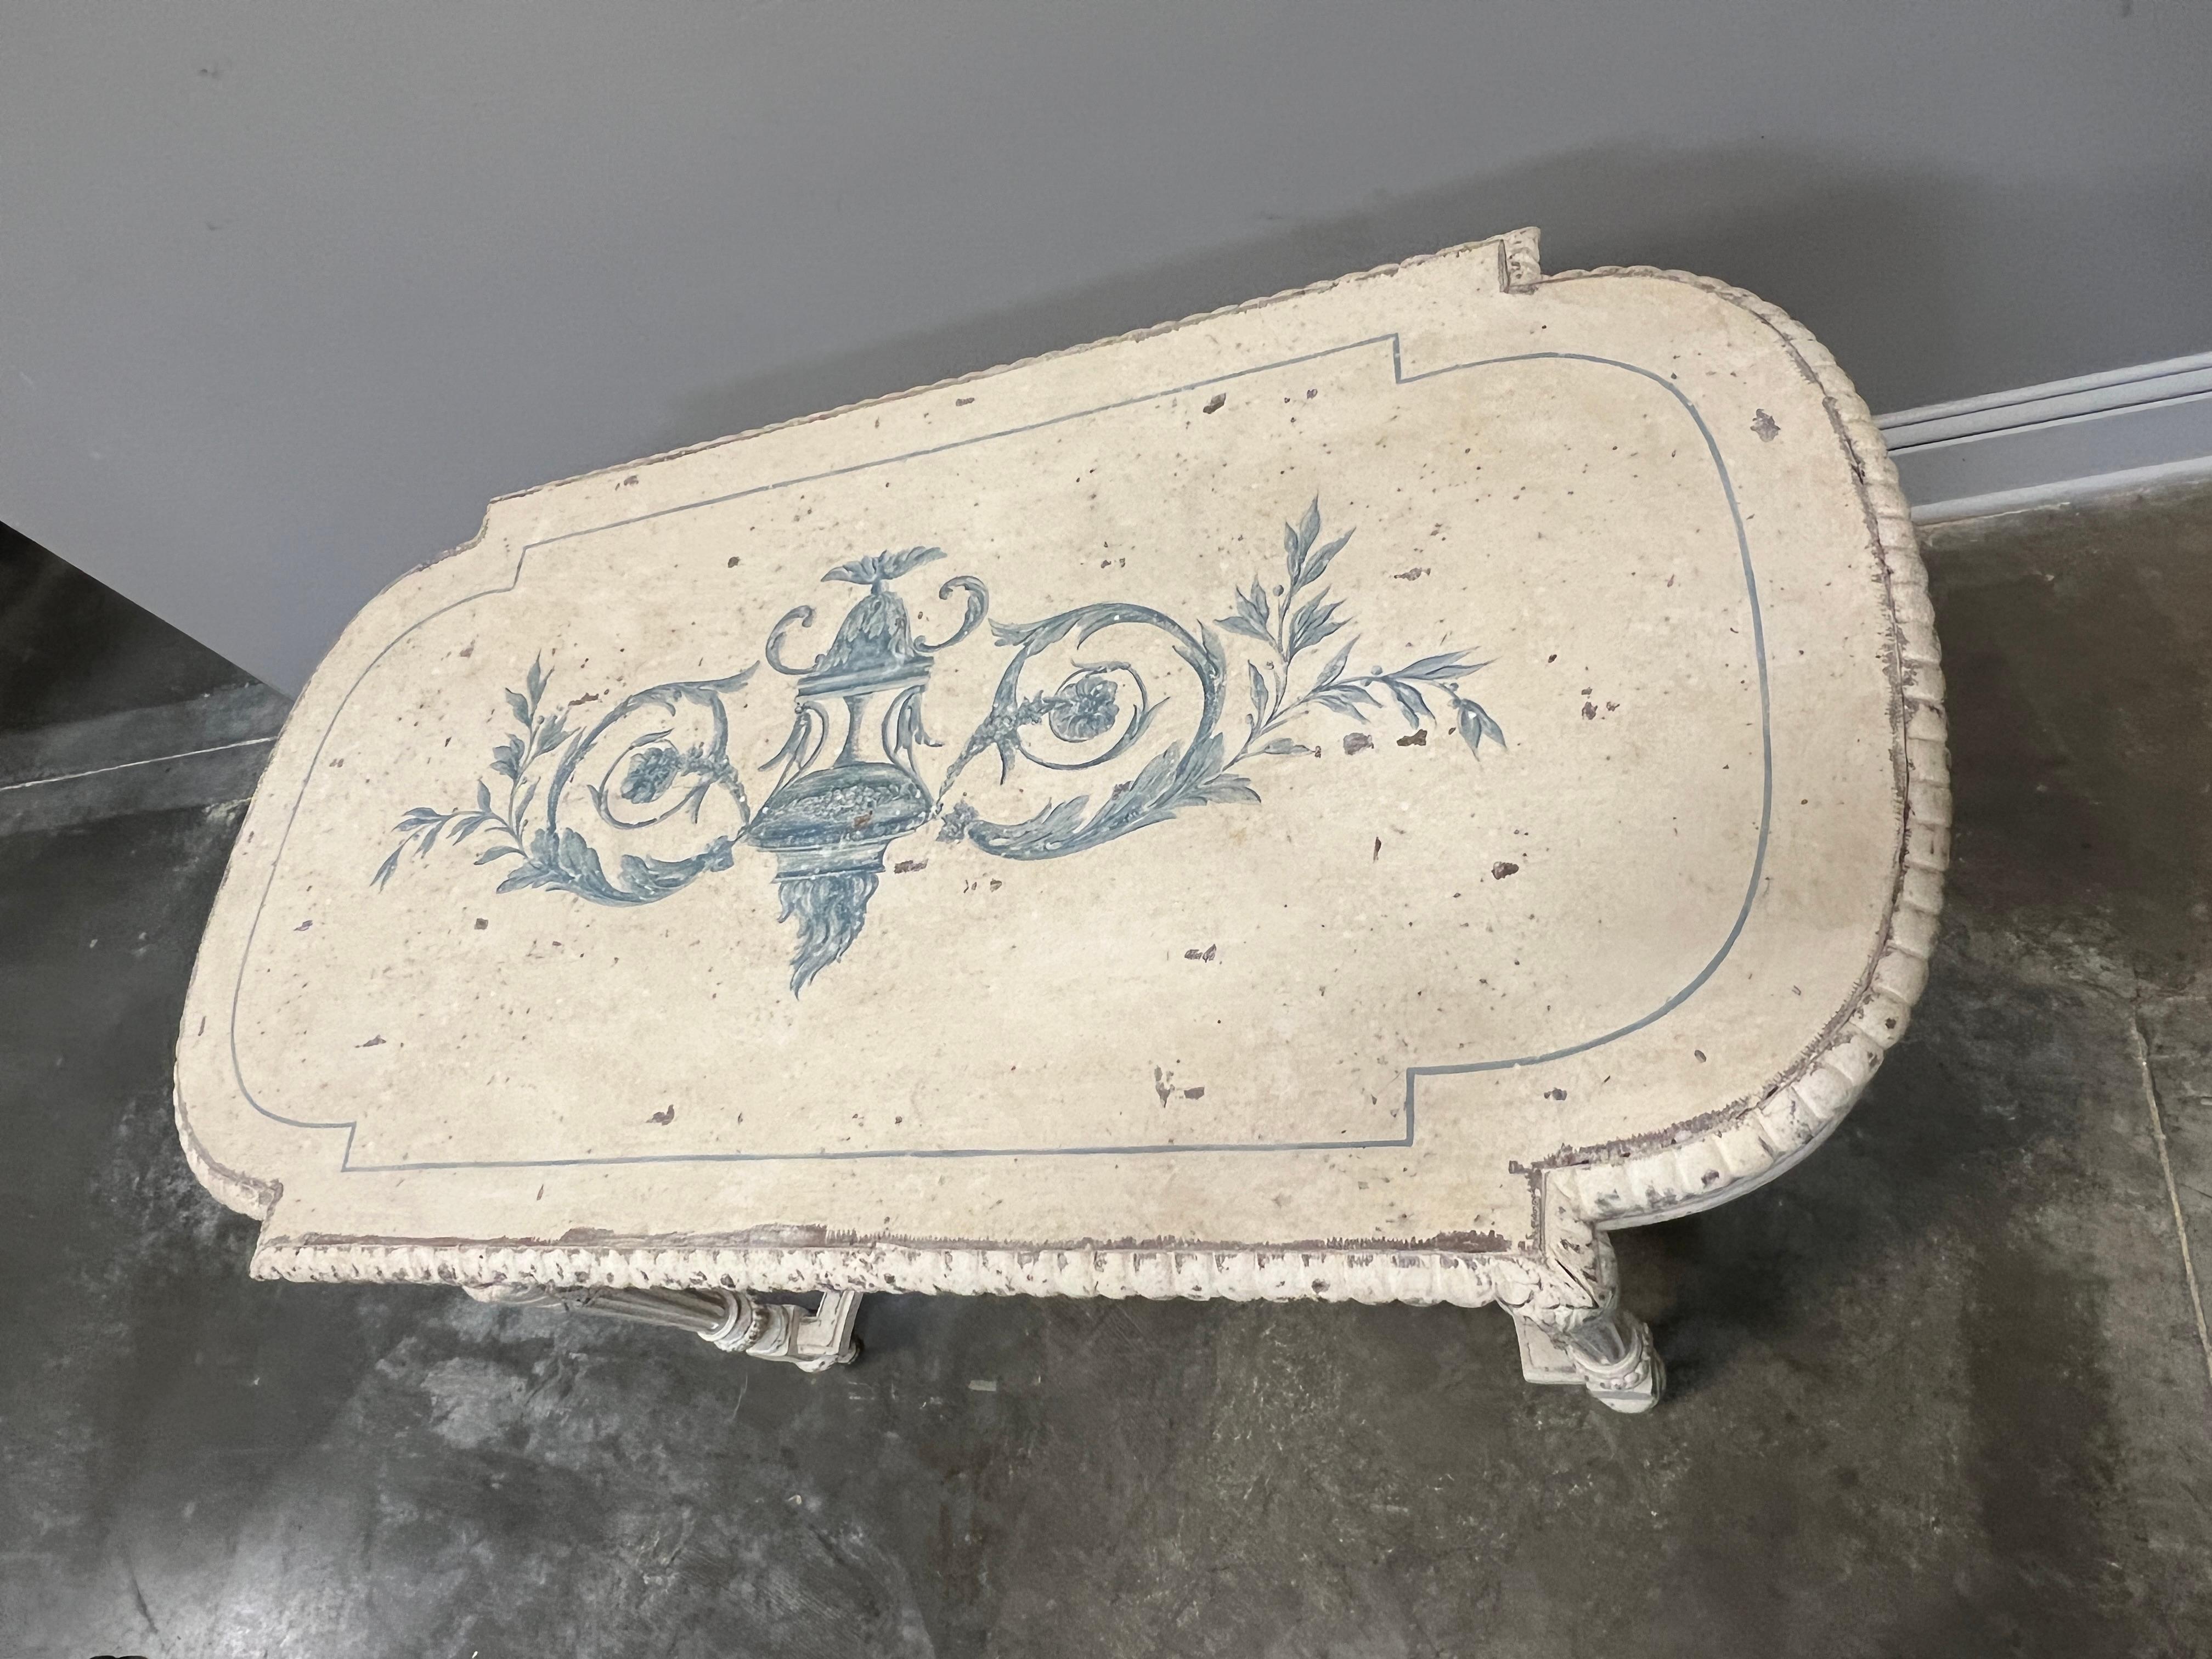 Decoratively painted Victorian age parlor table in Louis XVI style. Quality construction and painted in cream with a Neoclassic motif painted on center top. Table can be used as a desk or a vanity with one drawer.

High quality construction with